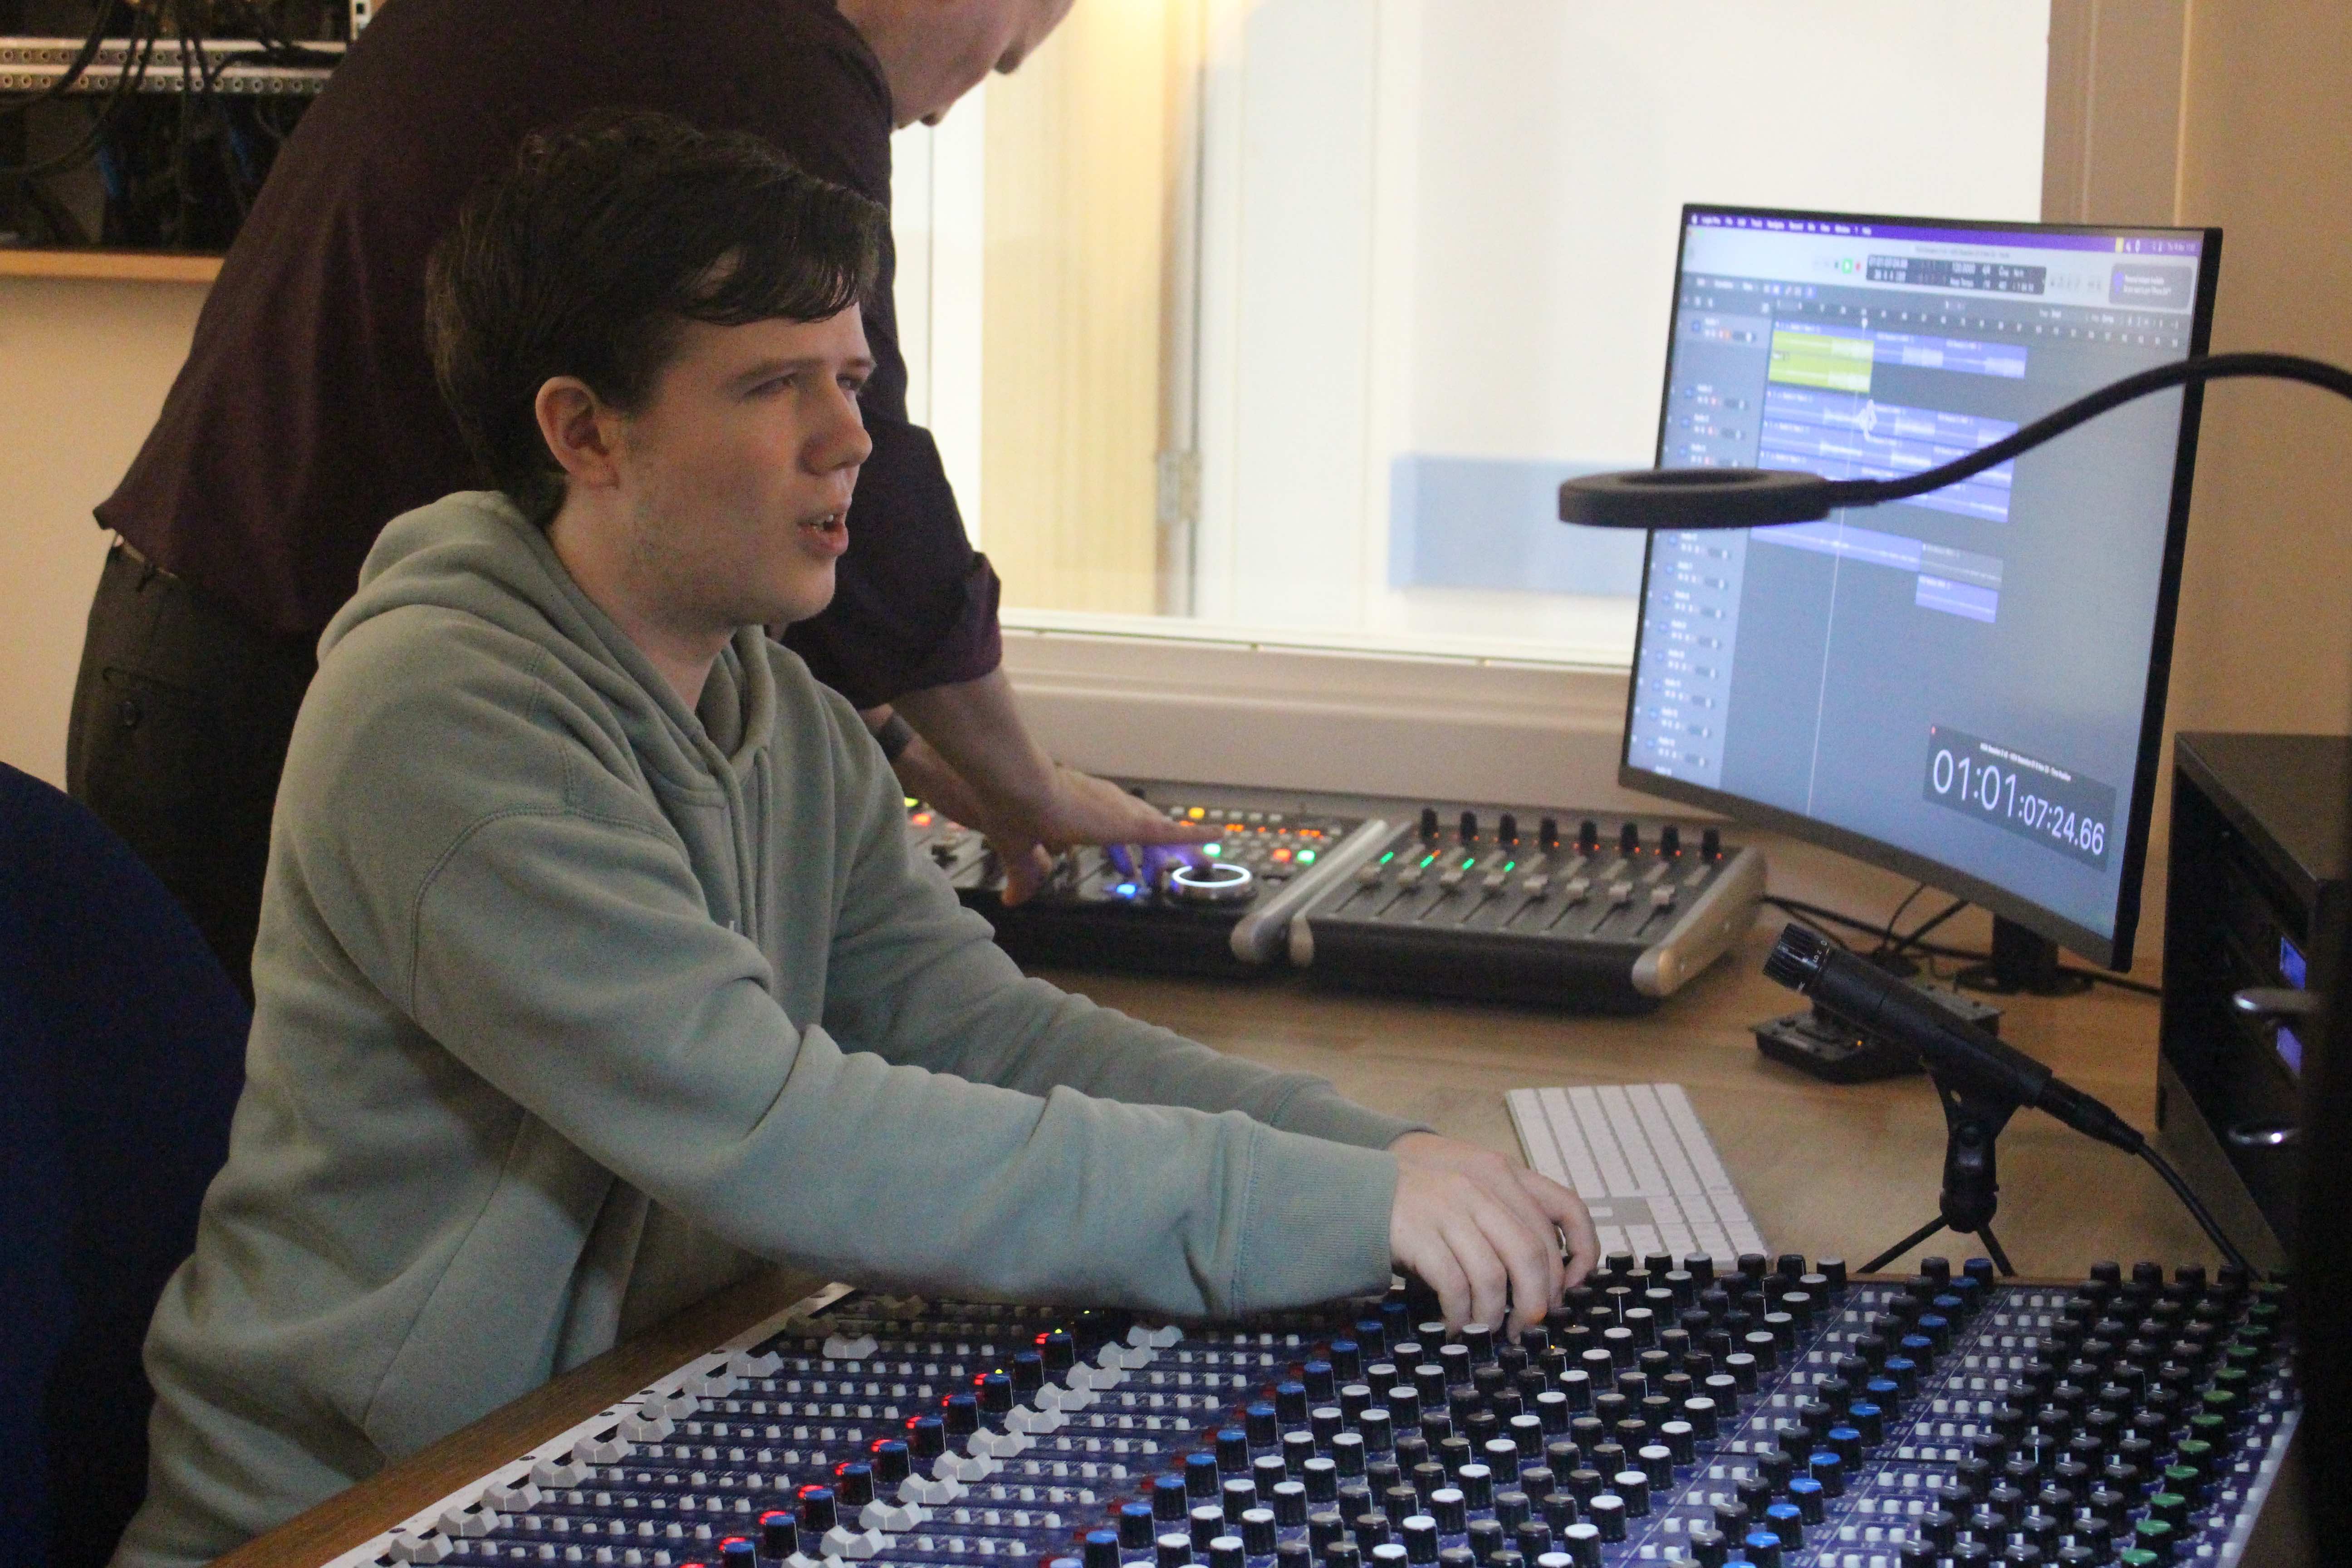 A male student using the mixing desk